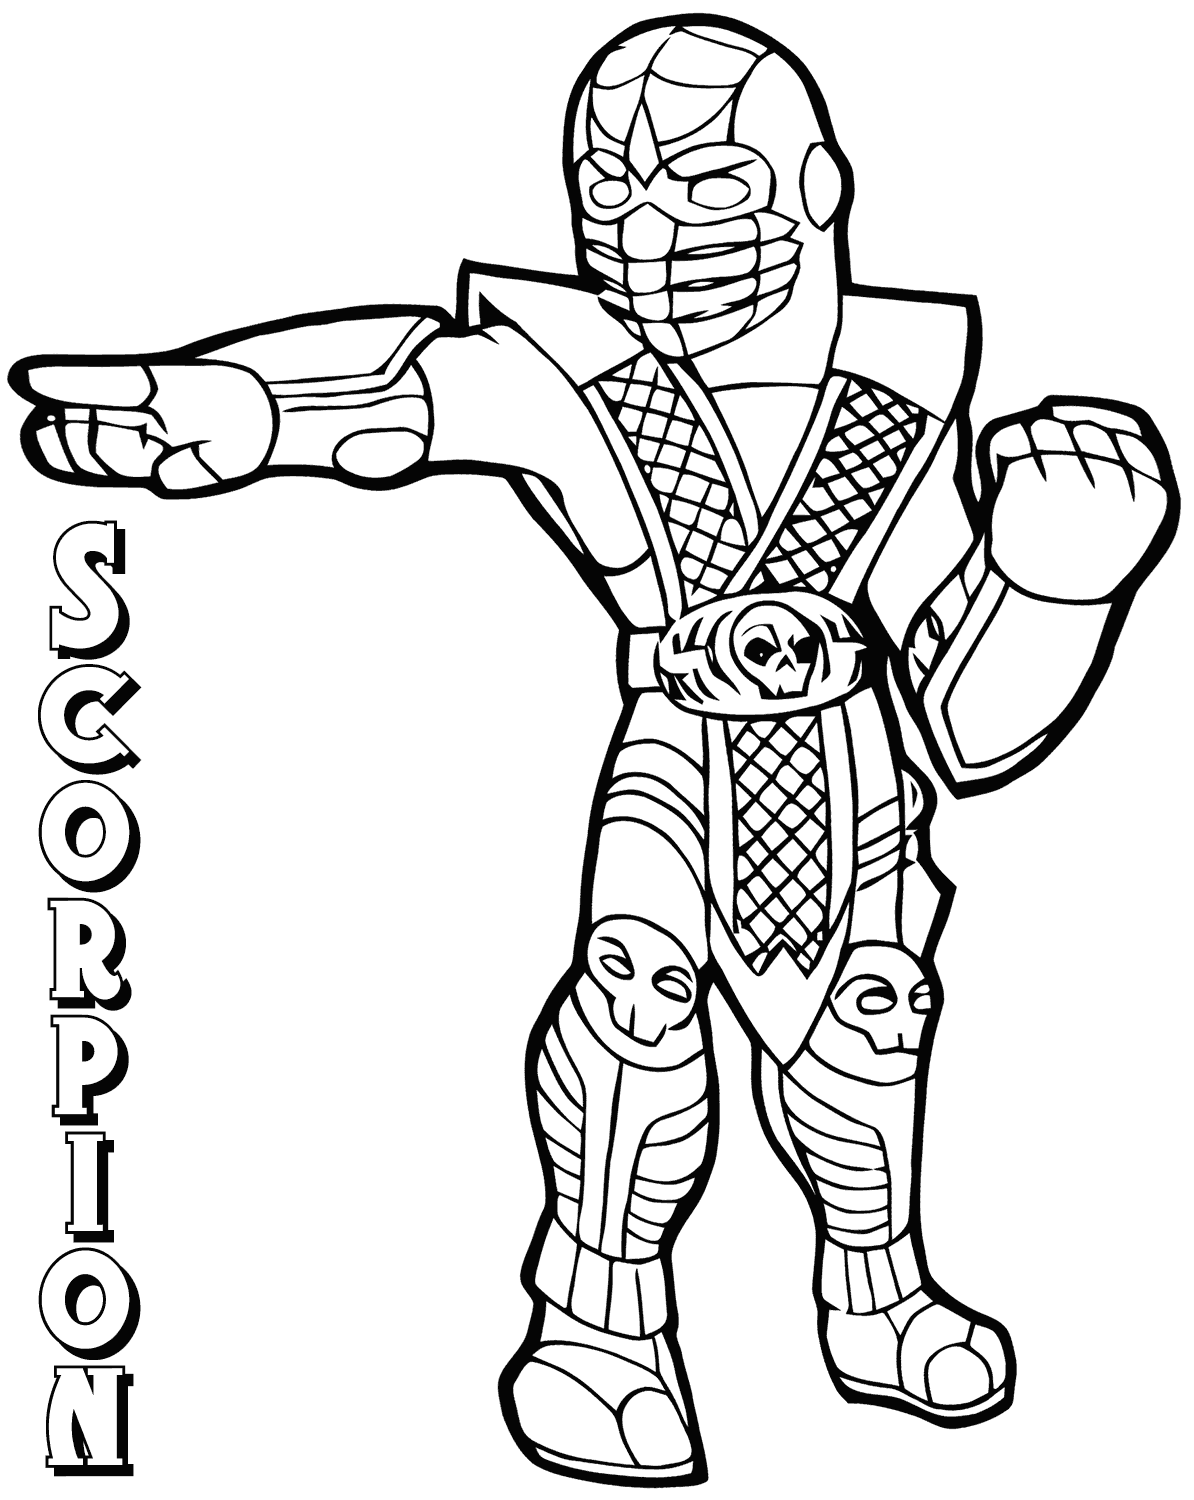 Mortal Kombat Coloring Pages   Coloring Pages To Download And ...